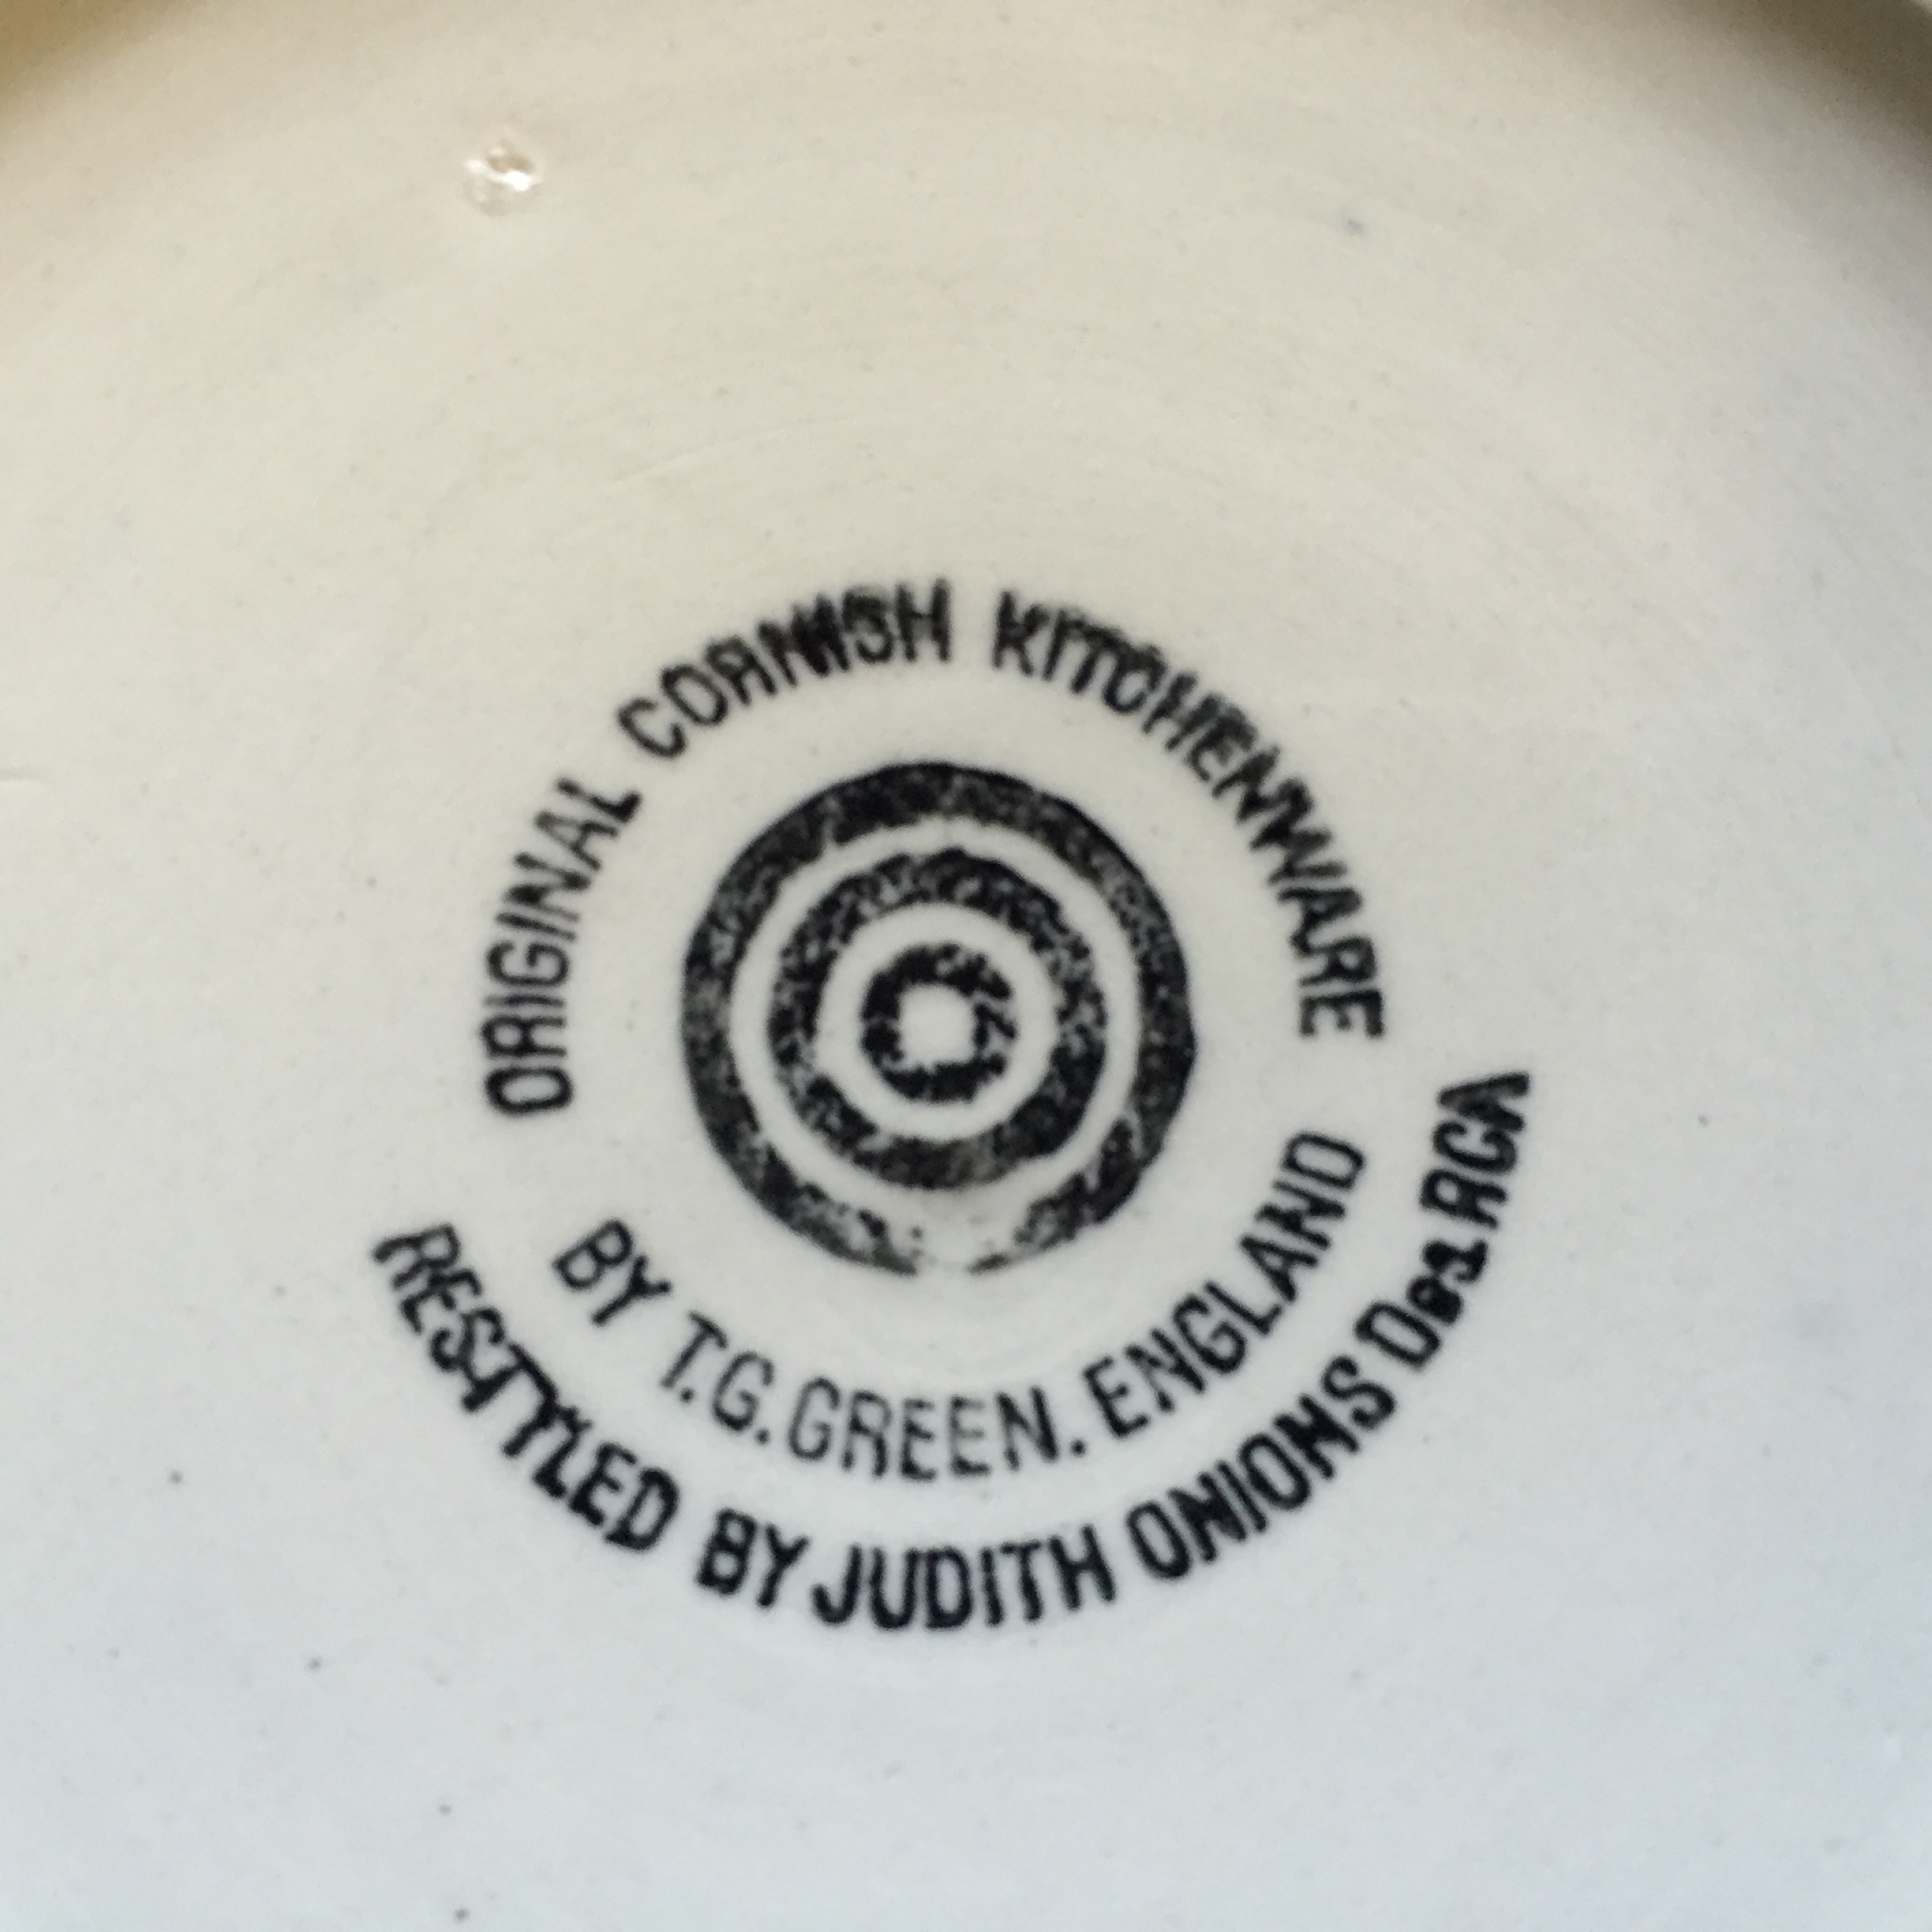 T & G Green blue and white Cornish ware with raised bands including Gresley back stamp. - Image 6 of 6